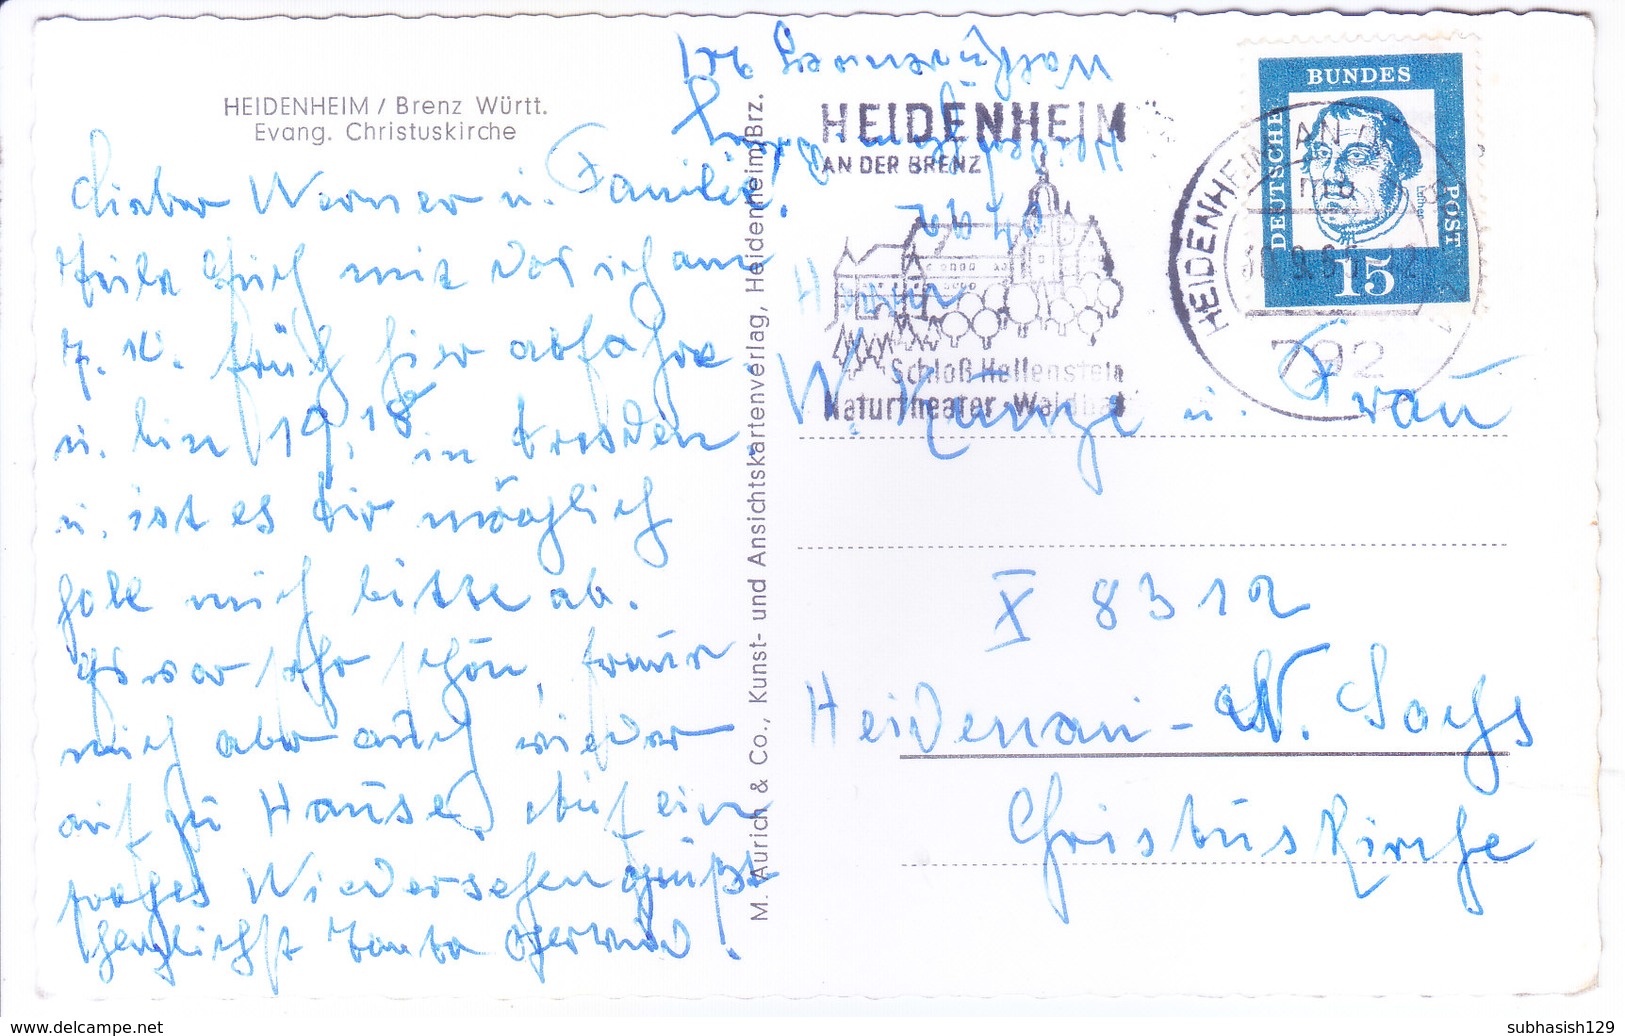 GERMANY, FEDERAL REPUBLIC : ORIGINAL PHOTO PICTURE POST CARD : SPECIAL PICTORIAL CANCELLATION : YEAR - 1965 : HEIDENHEIM - Covers & Documents